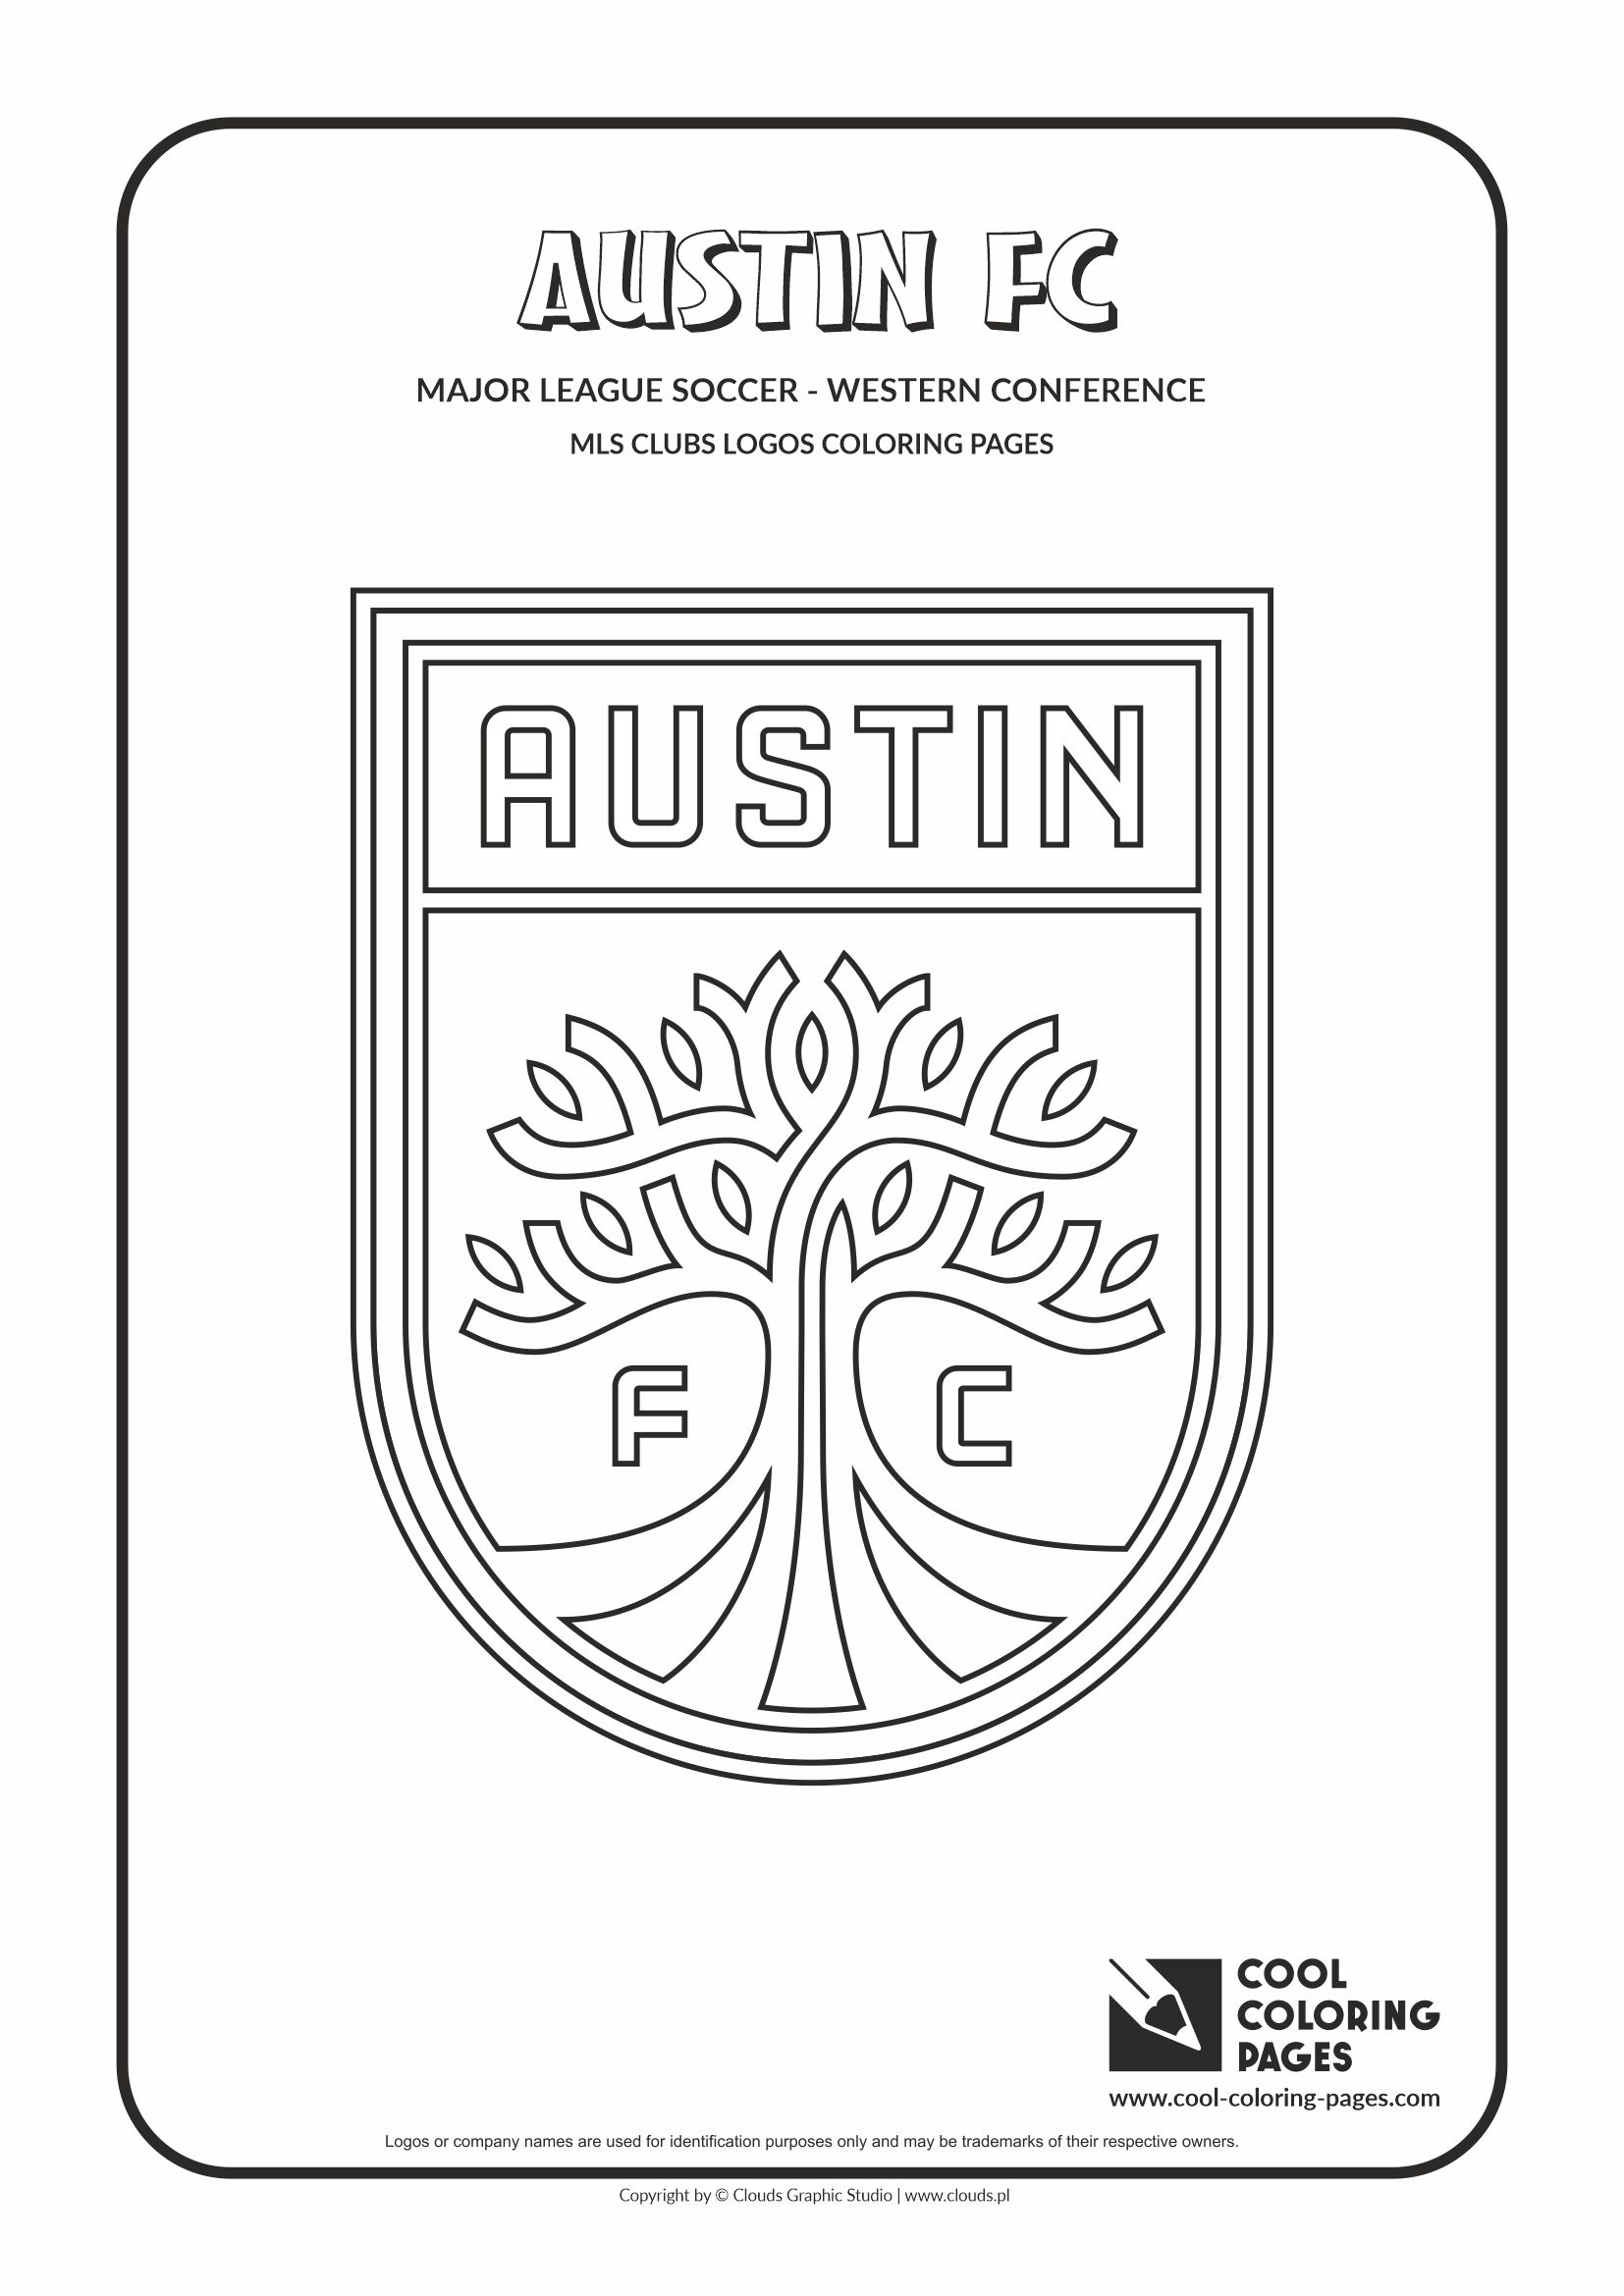 Cool Coloring Pages – MLS clubs logos - Austin FC